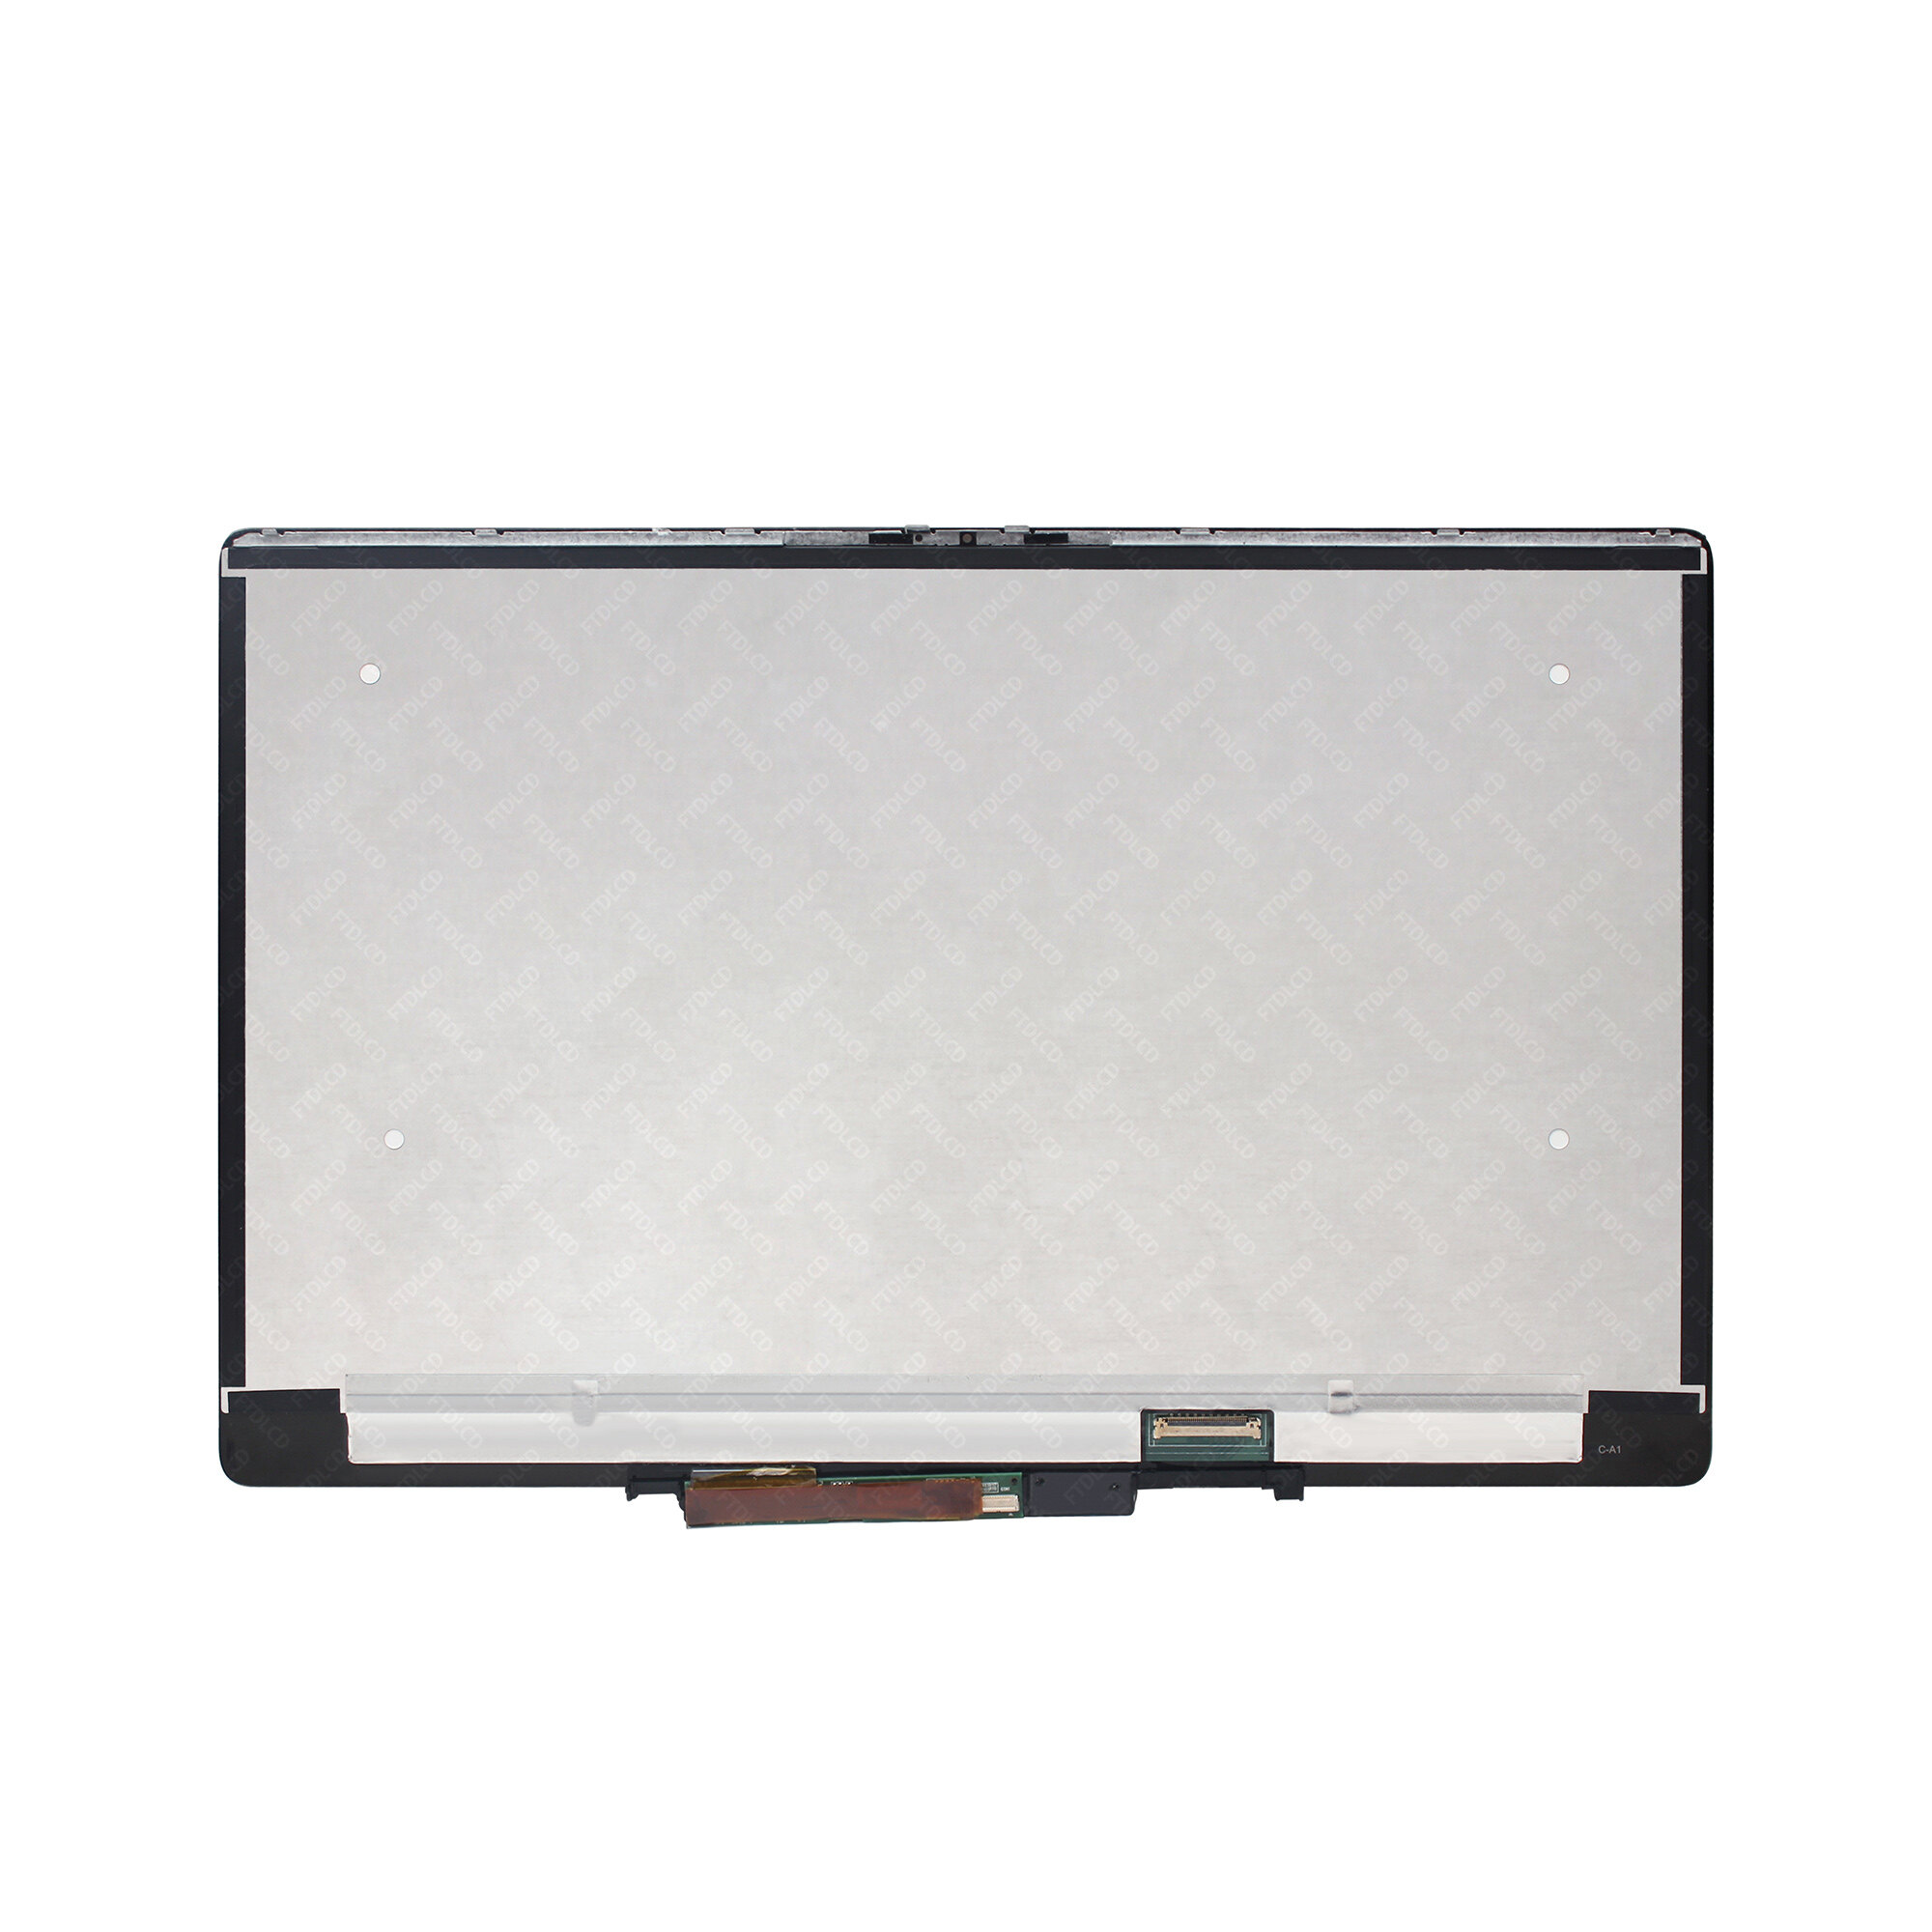 Kreplacement 4K UHD LED LCD Touch Screen Digitizer Display Assembly for Dell Inspiron 13 7386